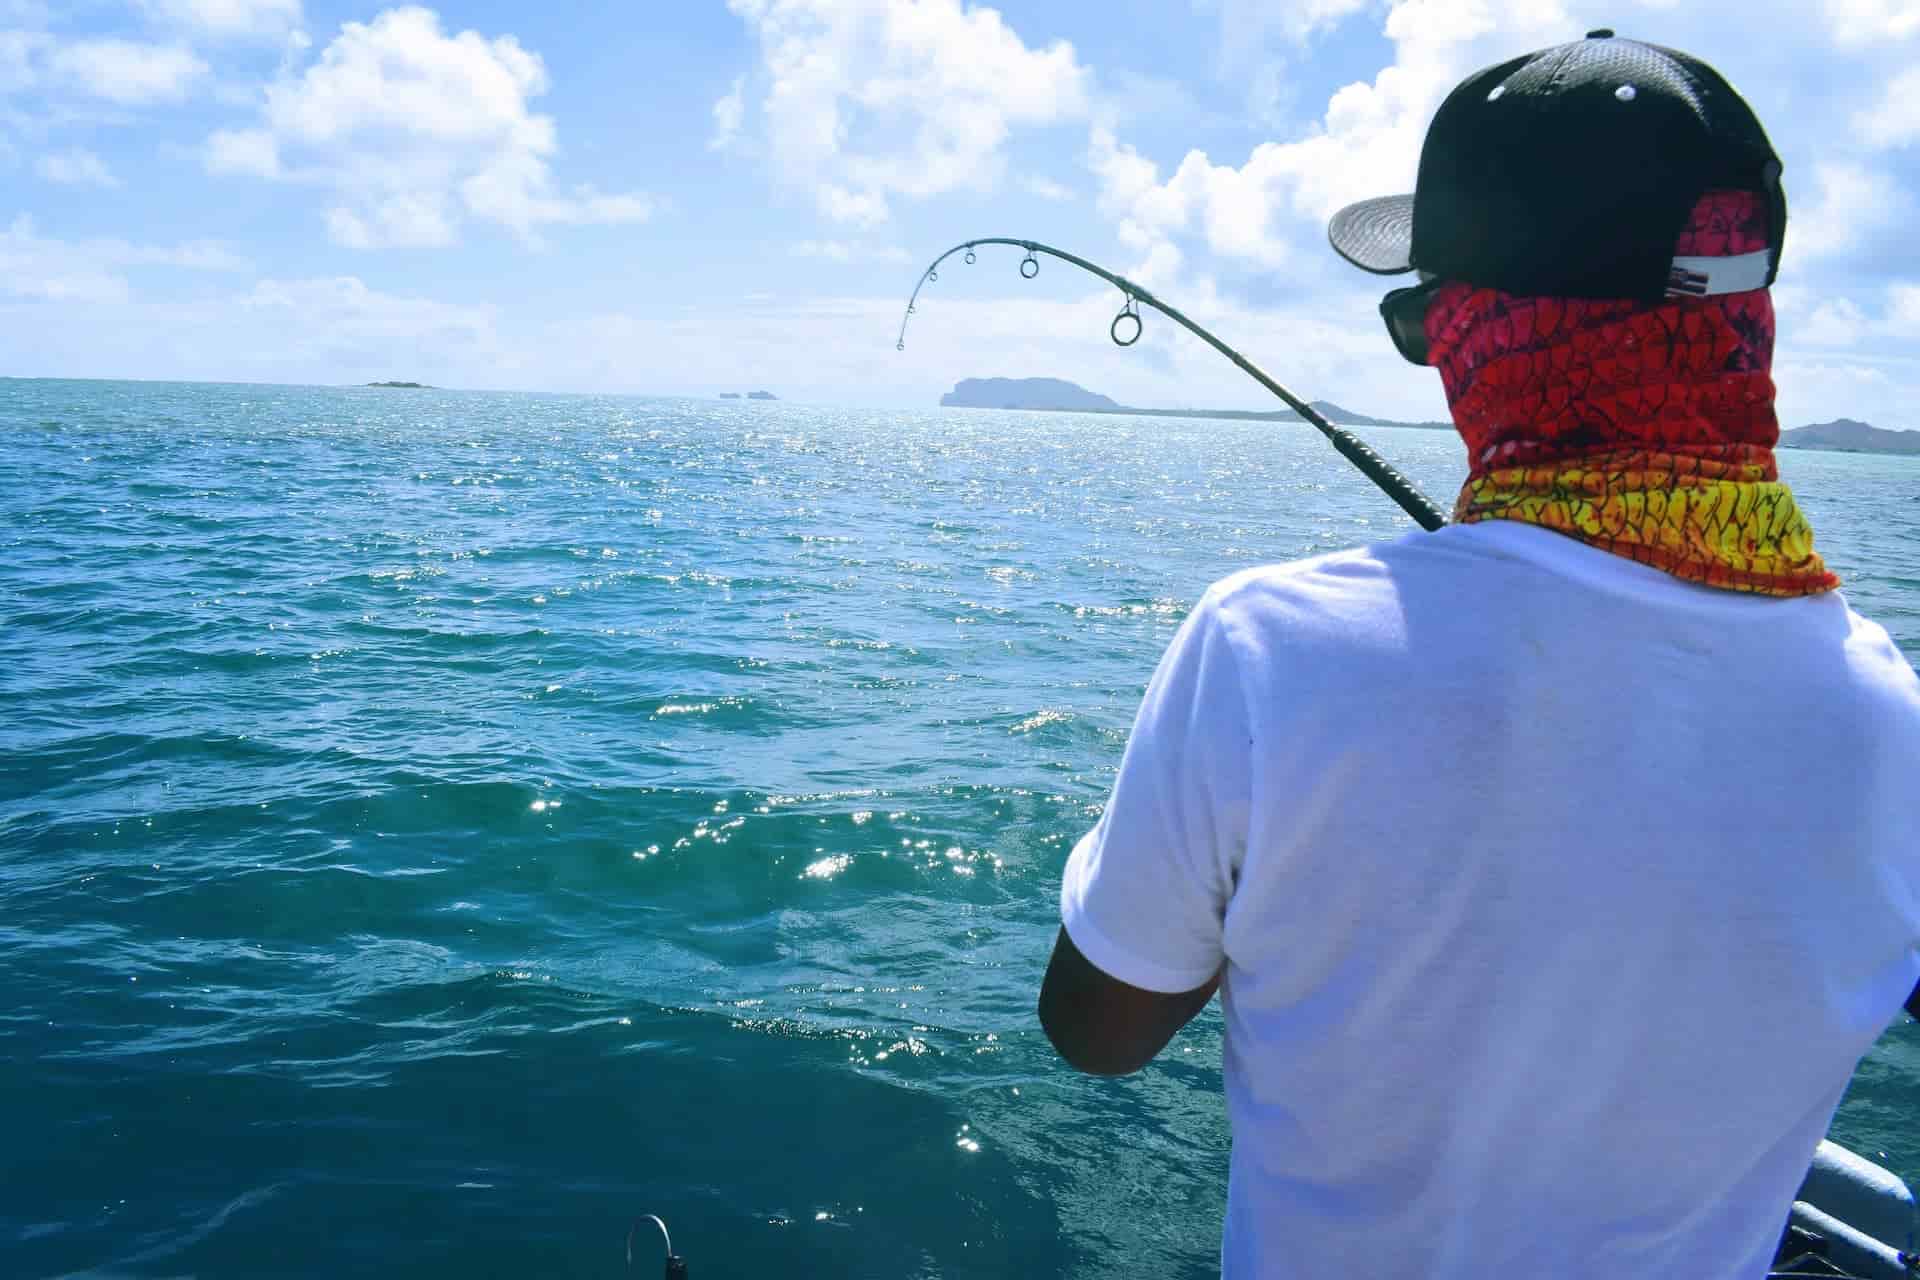 An offshore angler fishing at sea